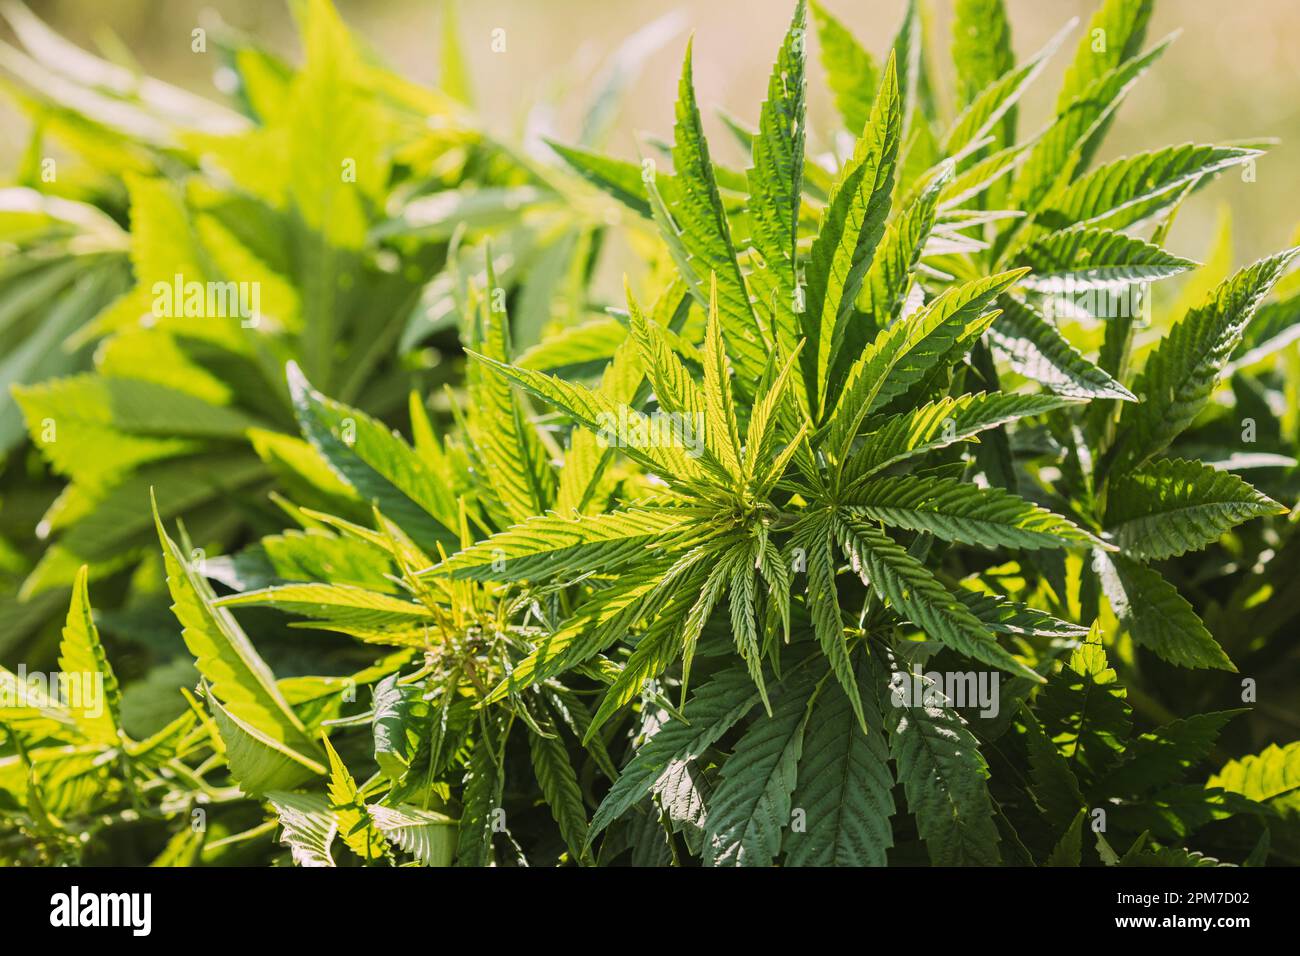 https://c8.alamy.com/comp/2PM7D02/legal-green-marijuana-cannabis-leaves-growing-at-farm-in-sunlight-beautiful-cannabis-cultivation-marijuana-cultivation-green-lush-leaves-young-2PM7D02.jpg